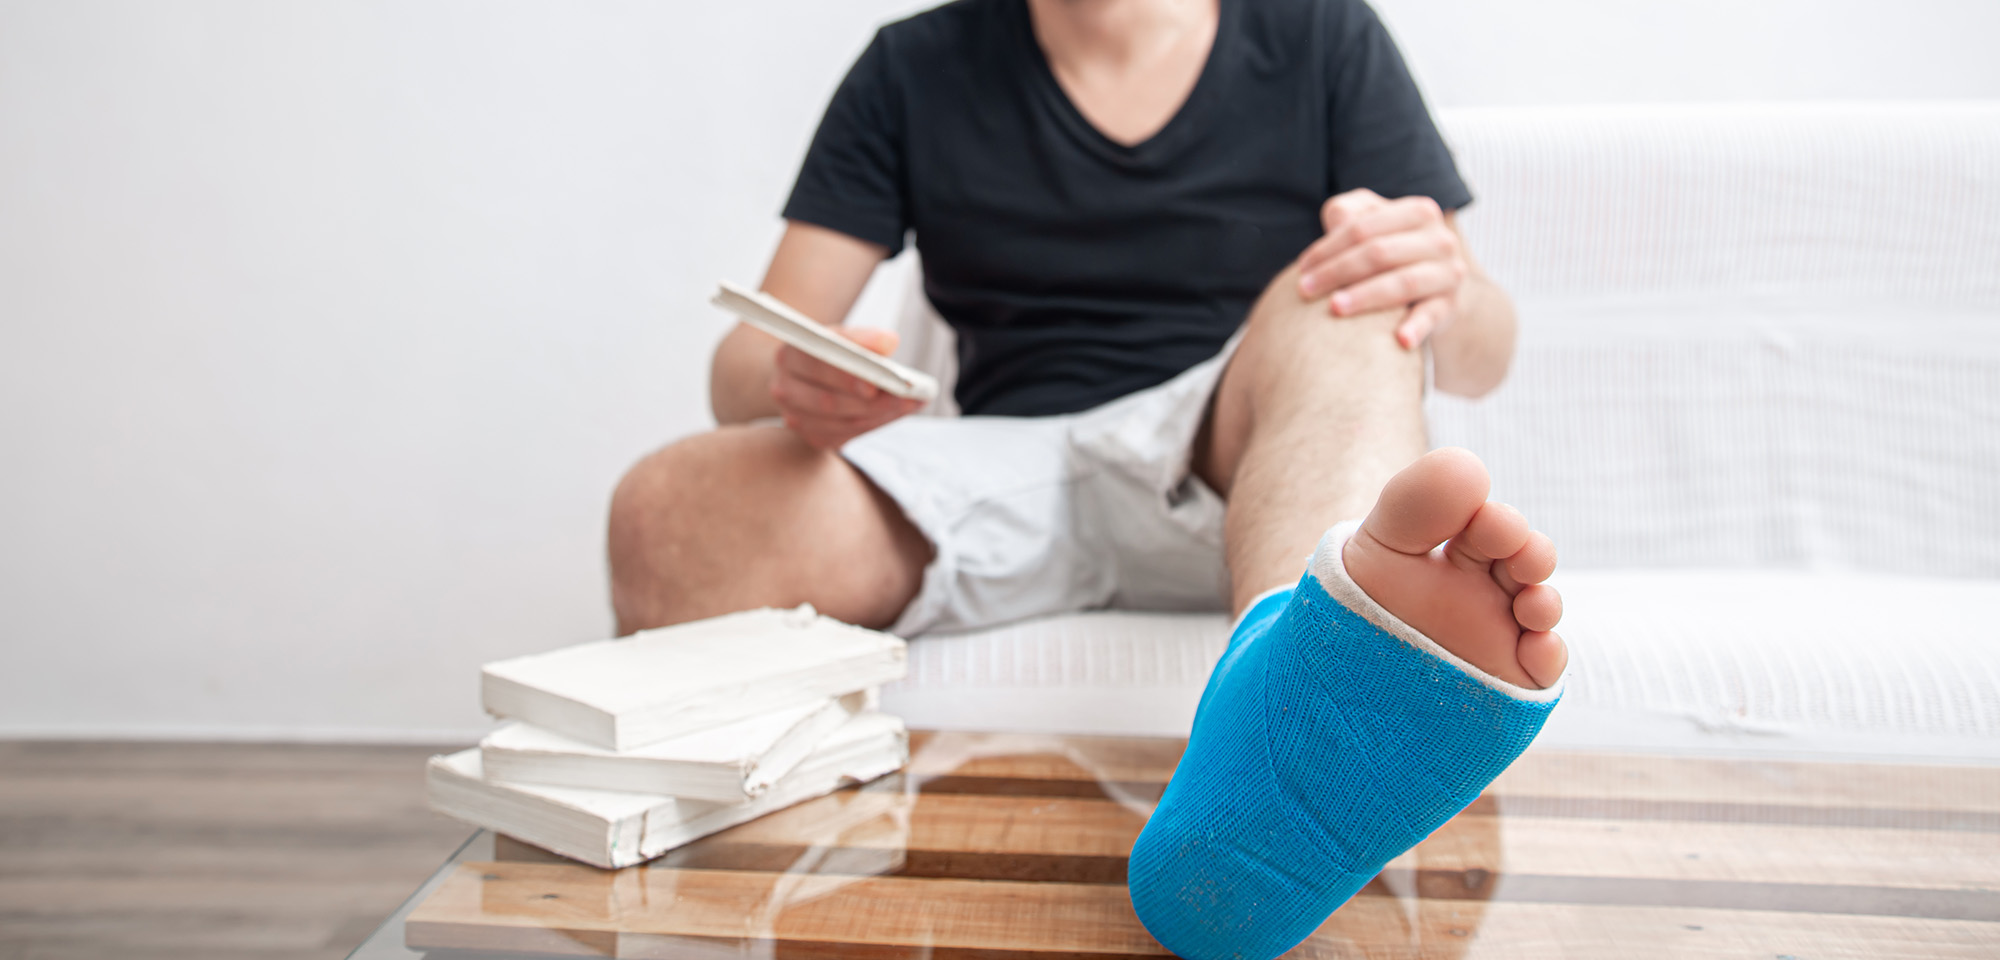 5 reasons your Achilles tendon exercises are failing!